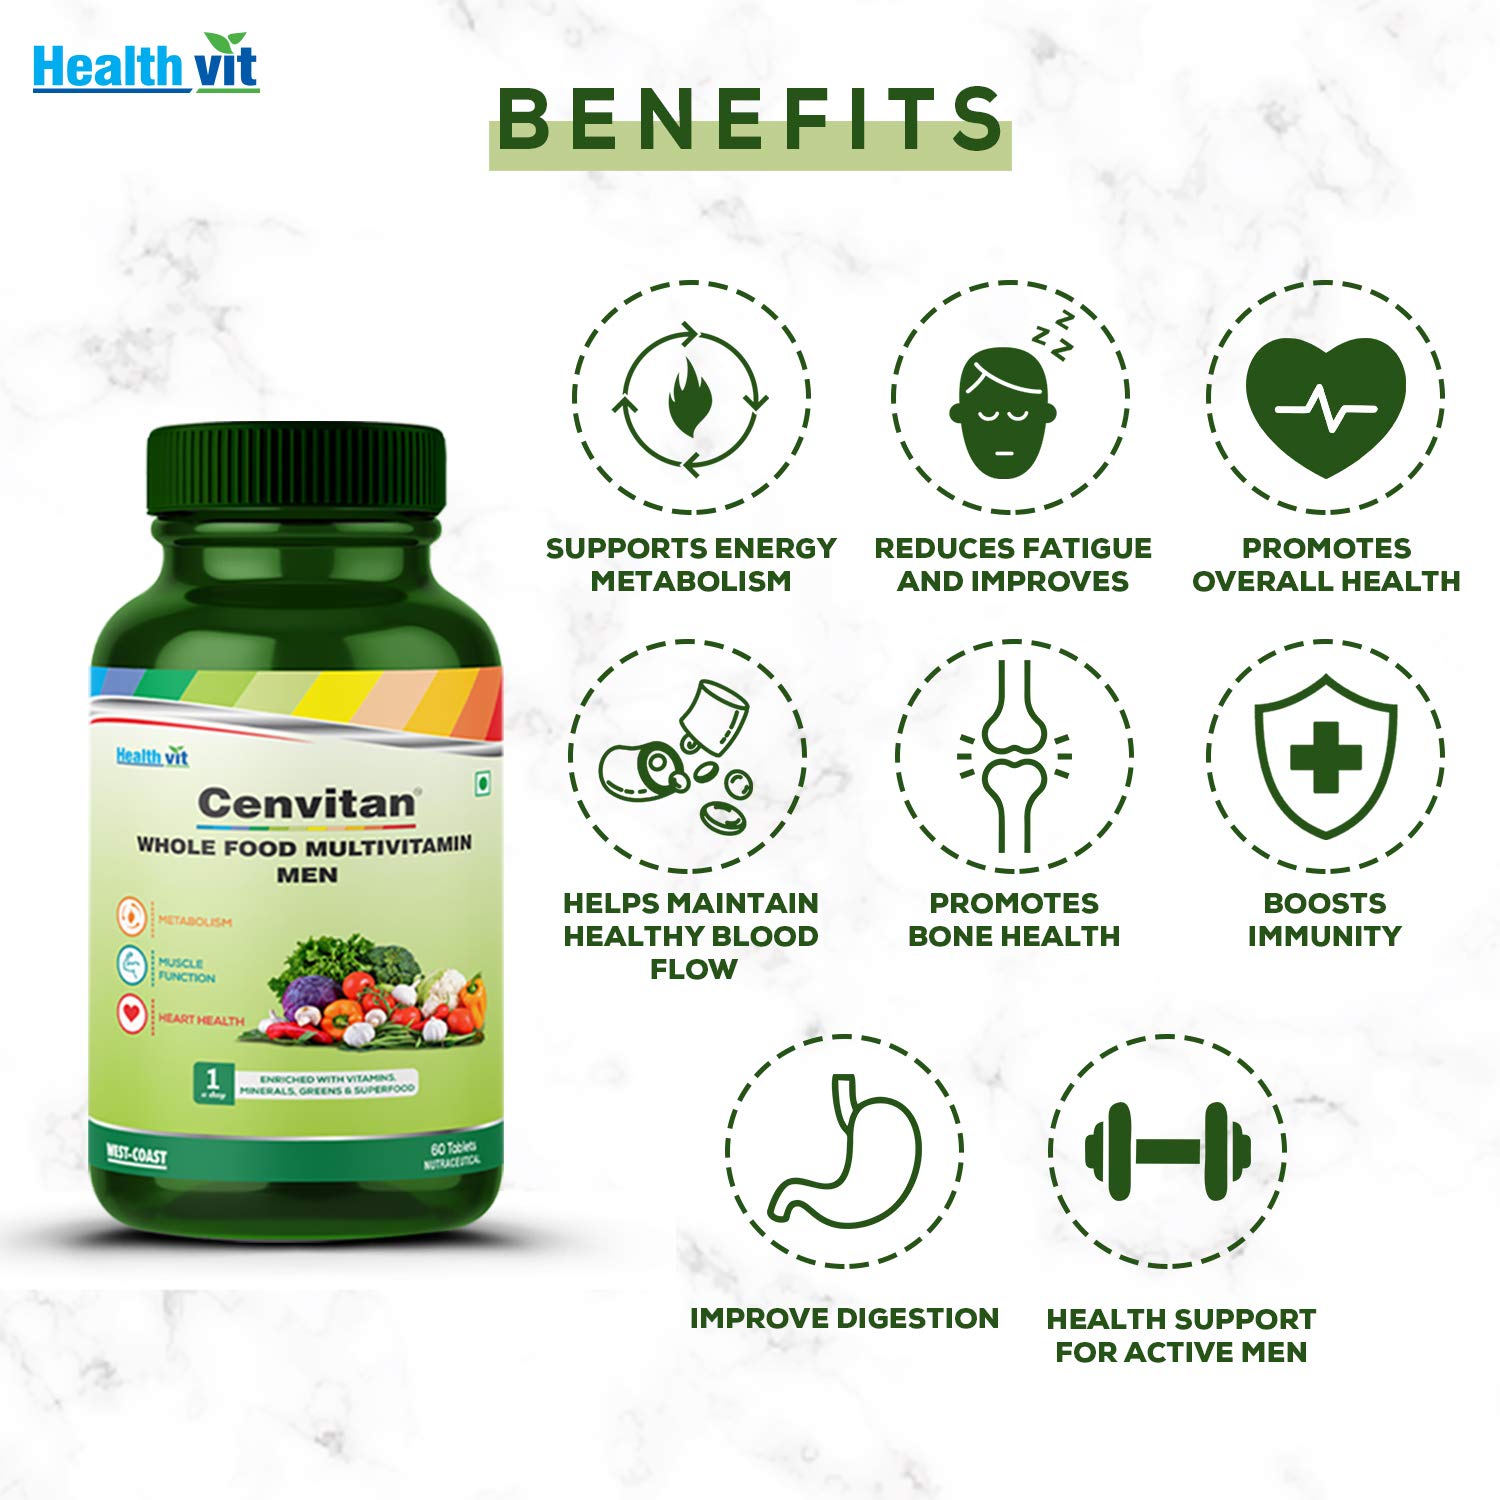 Healthvit Cenvitan Plant Based Whole Food Multivitamin for Men | Enriched with Vitamins Minerals Greens, Vegetables, Superfood, Fruits & Herbs Supplement For Immunity, Heart & Eye Health – 60 Tablets